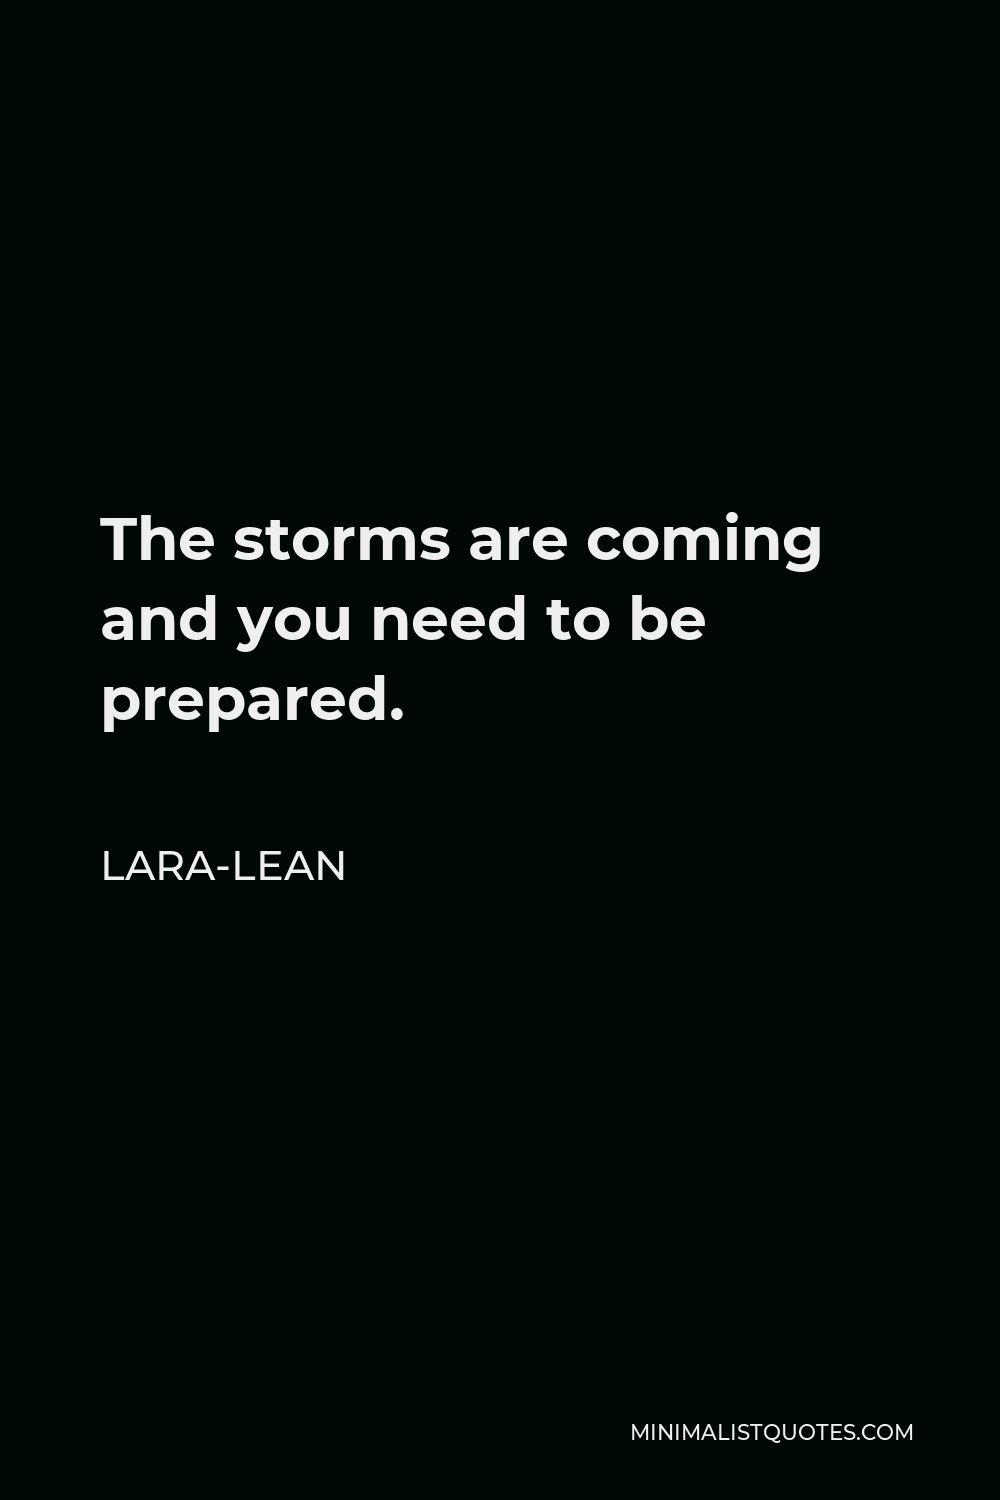 Lara-Lean Quote - The storms are coming and you need to be prepared.